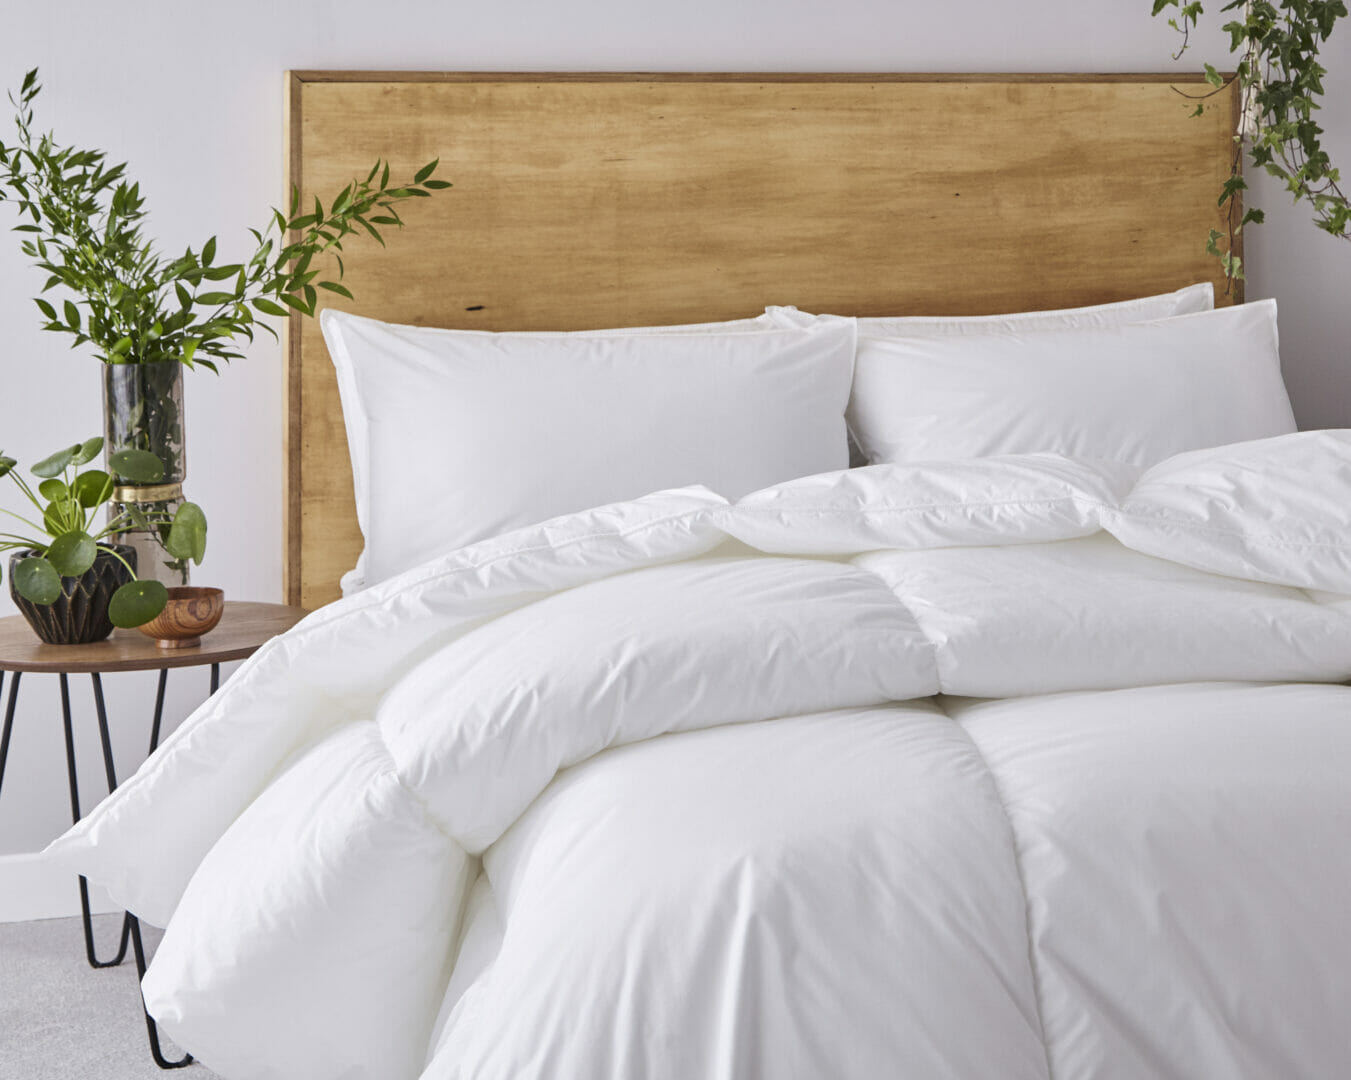 GIVE GUESTS THE GIFT OF A GOOD NIGHT’S SLEEP